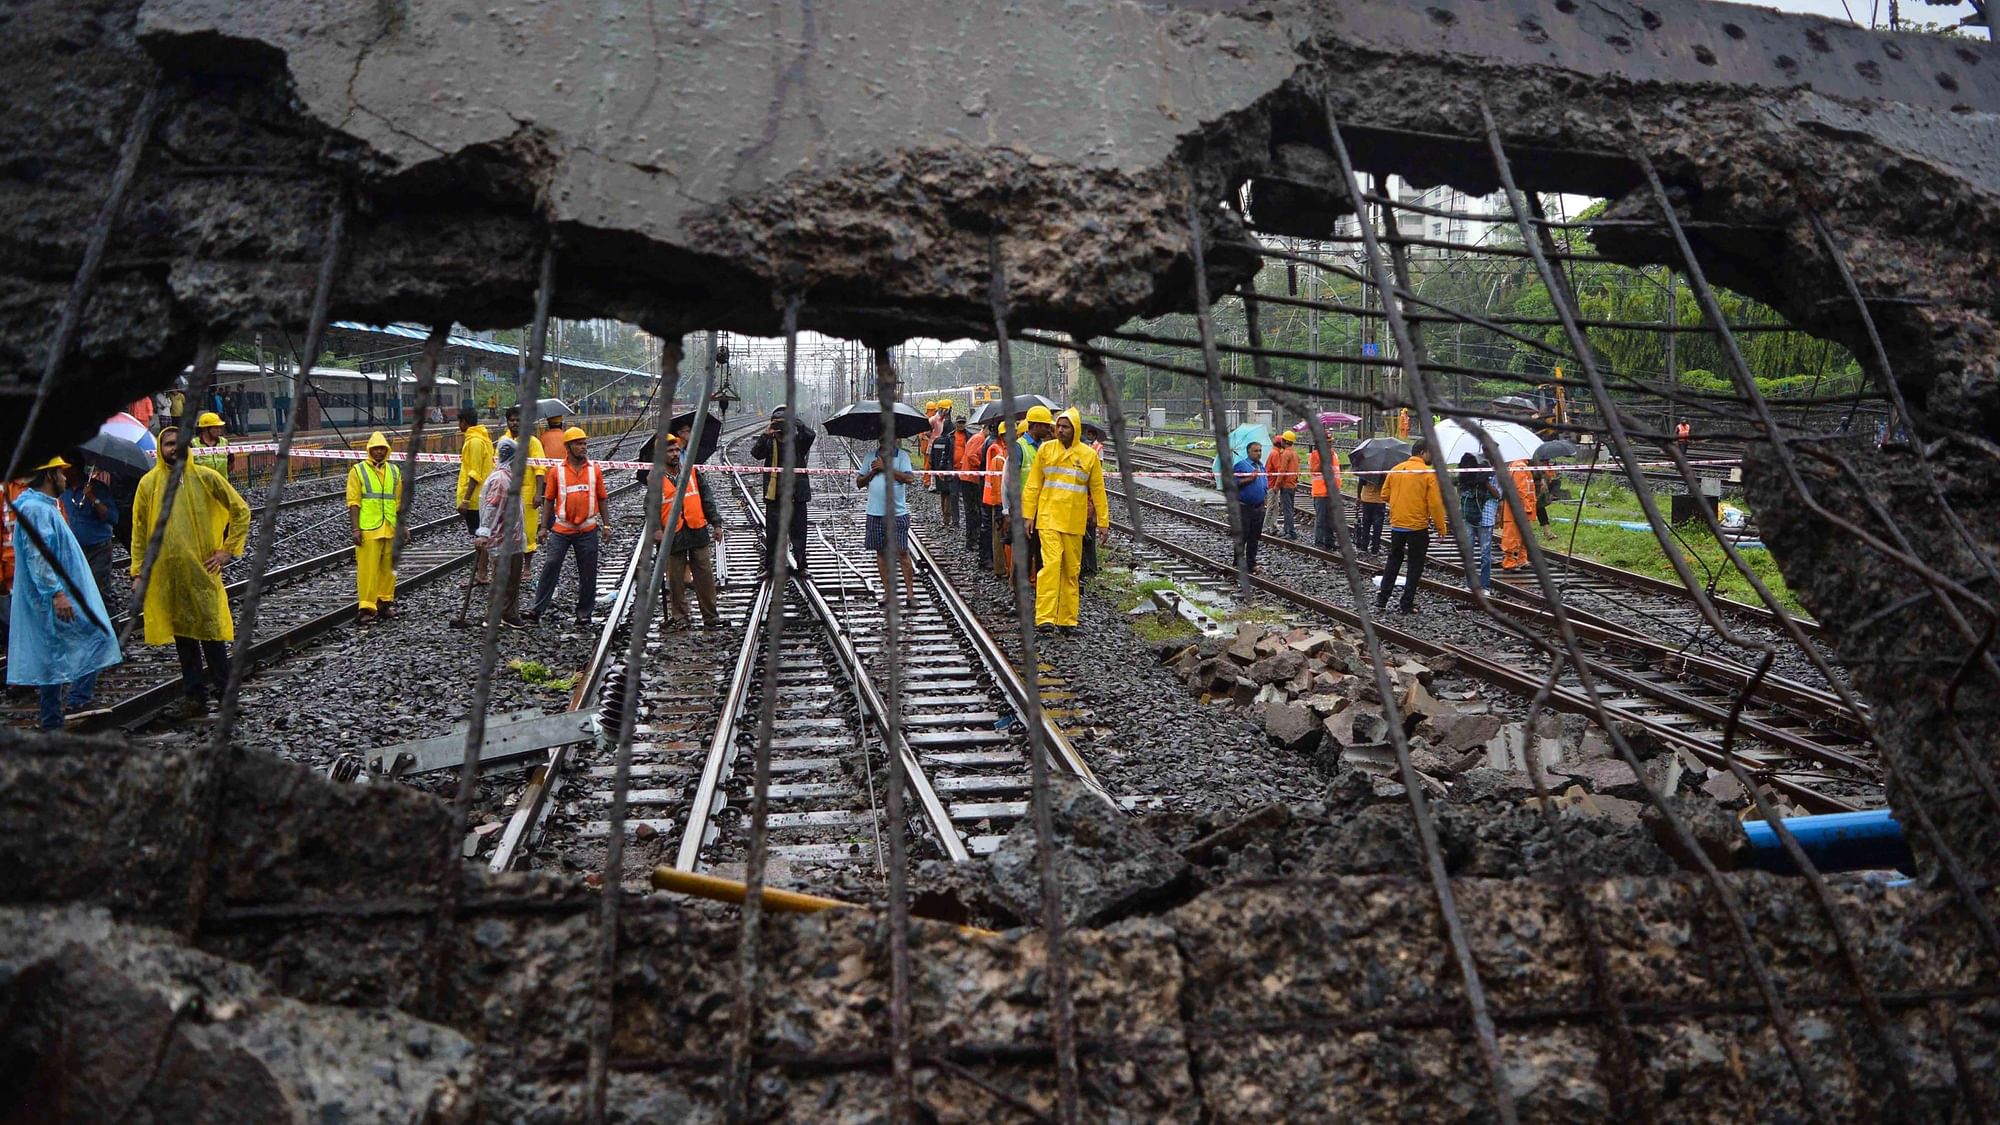 Multiple incidents of bridge collapses have taken place in last few years.